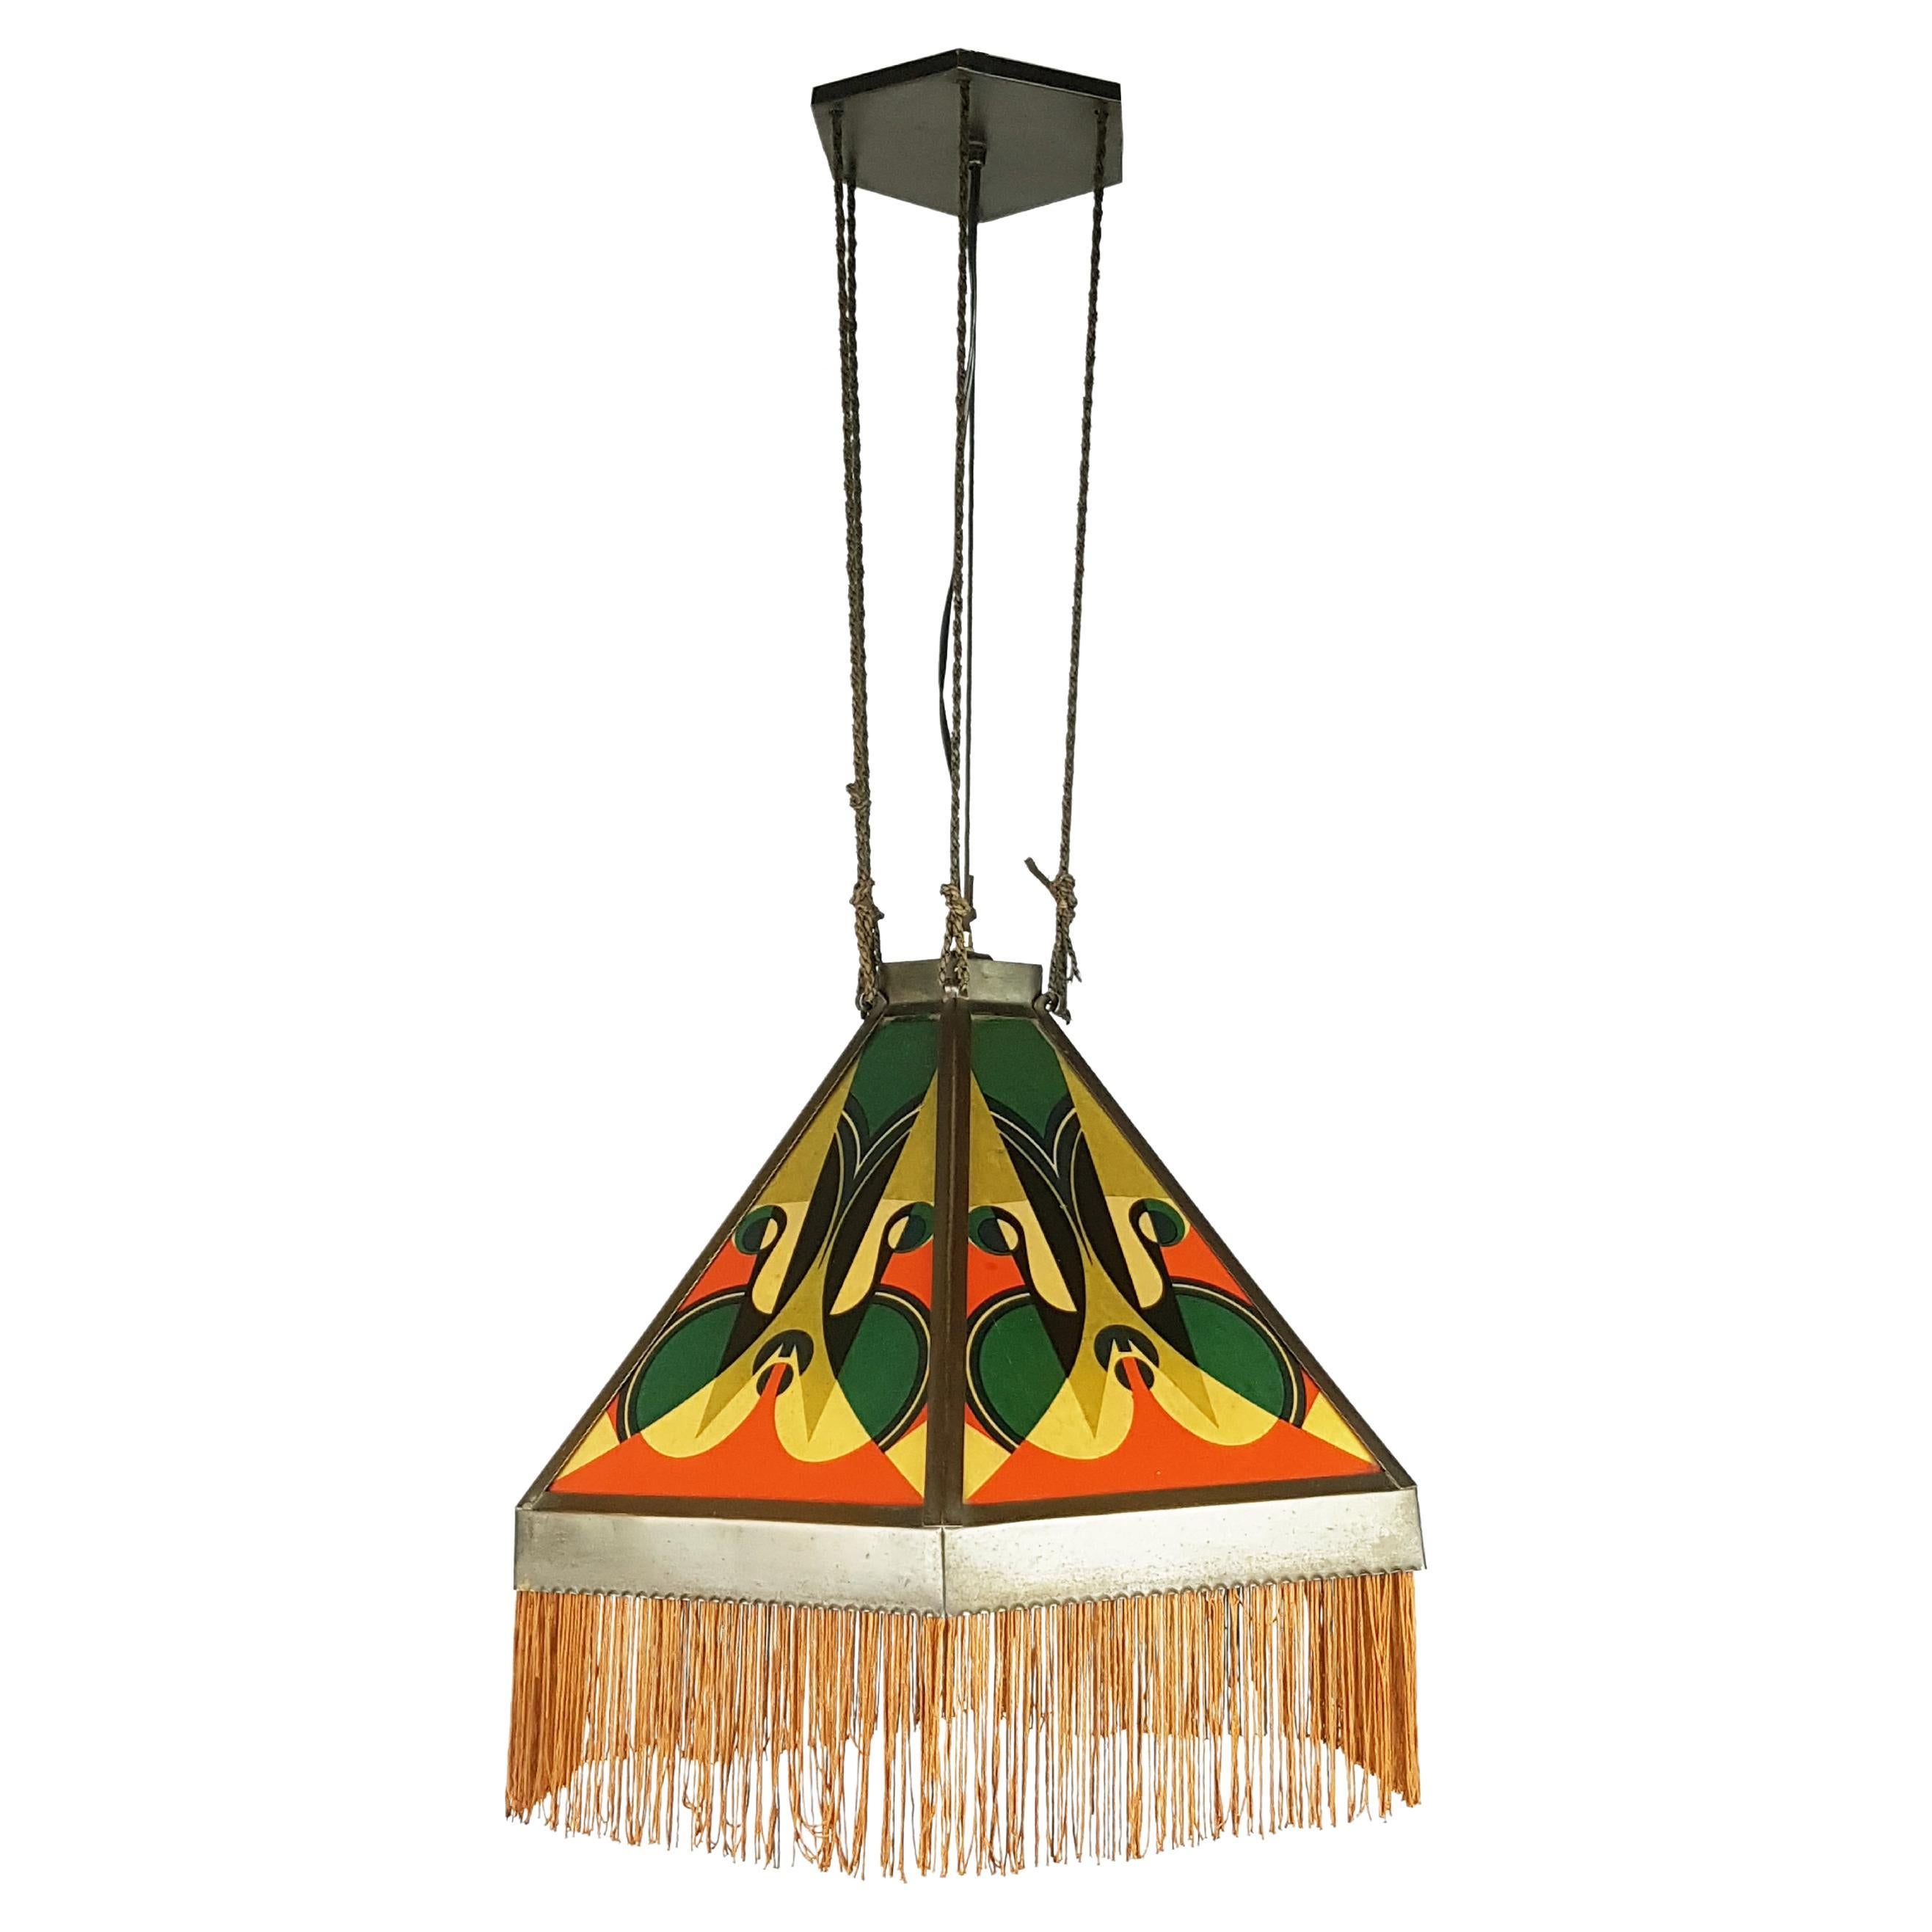 Copper & Printed Glass Art Deco Pendant Lamp Attributed to the Amsterdam School For Sale